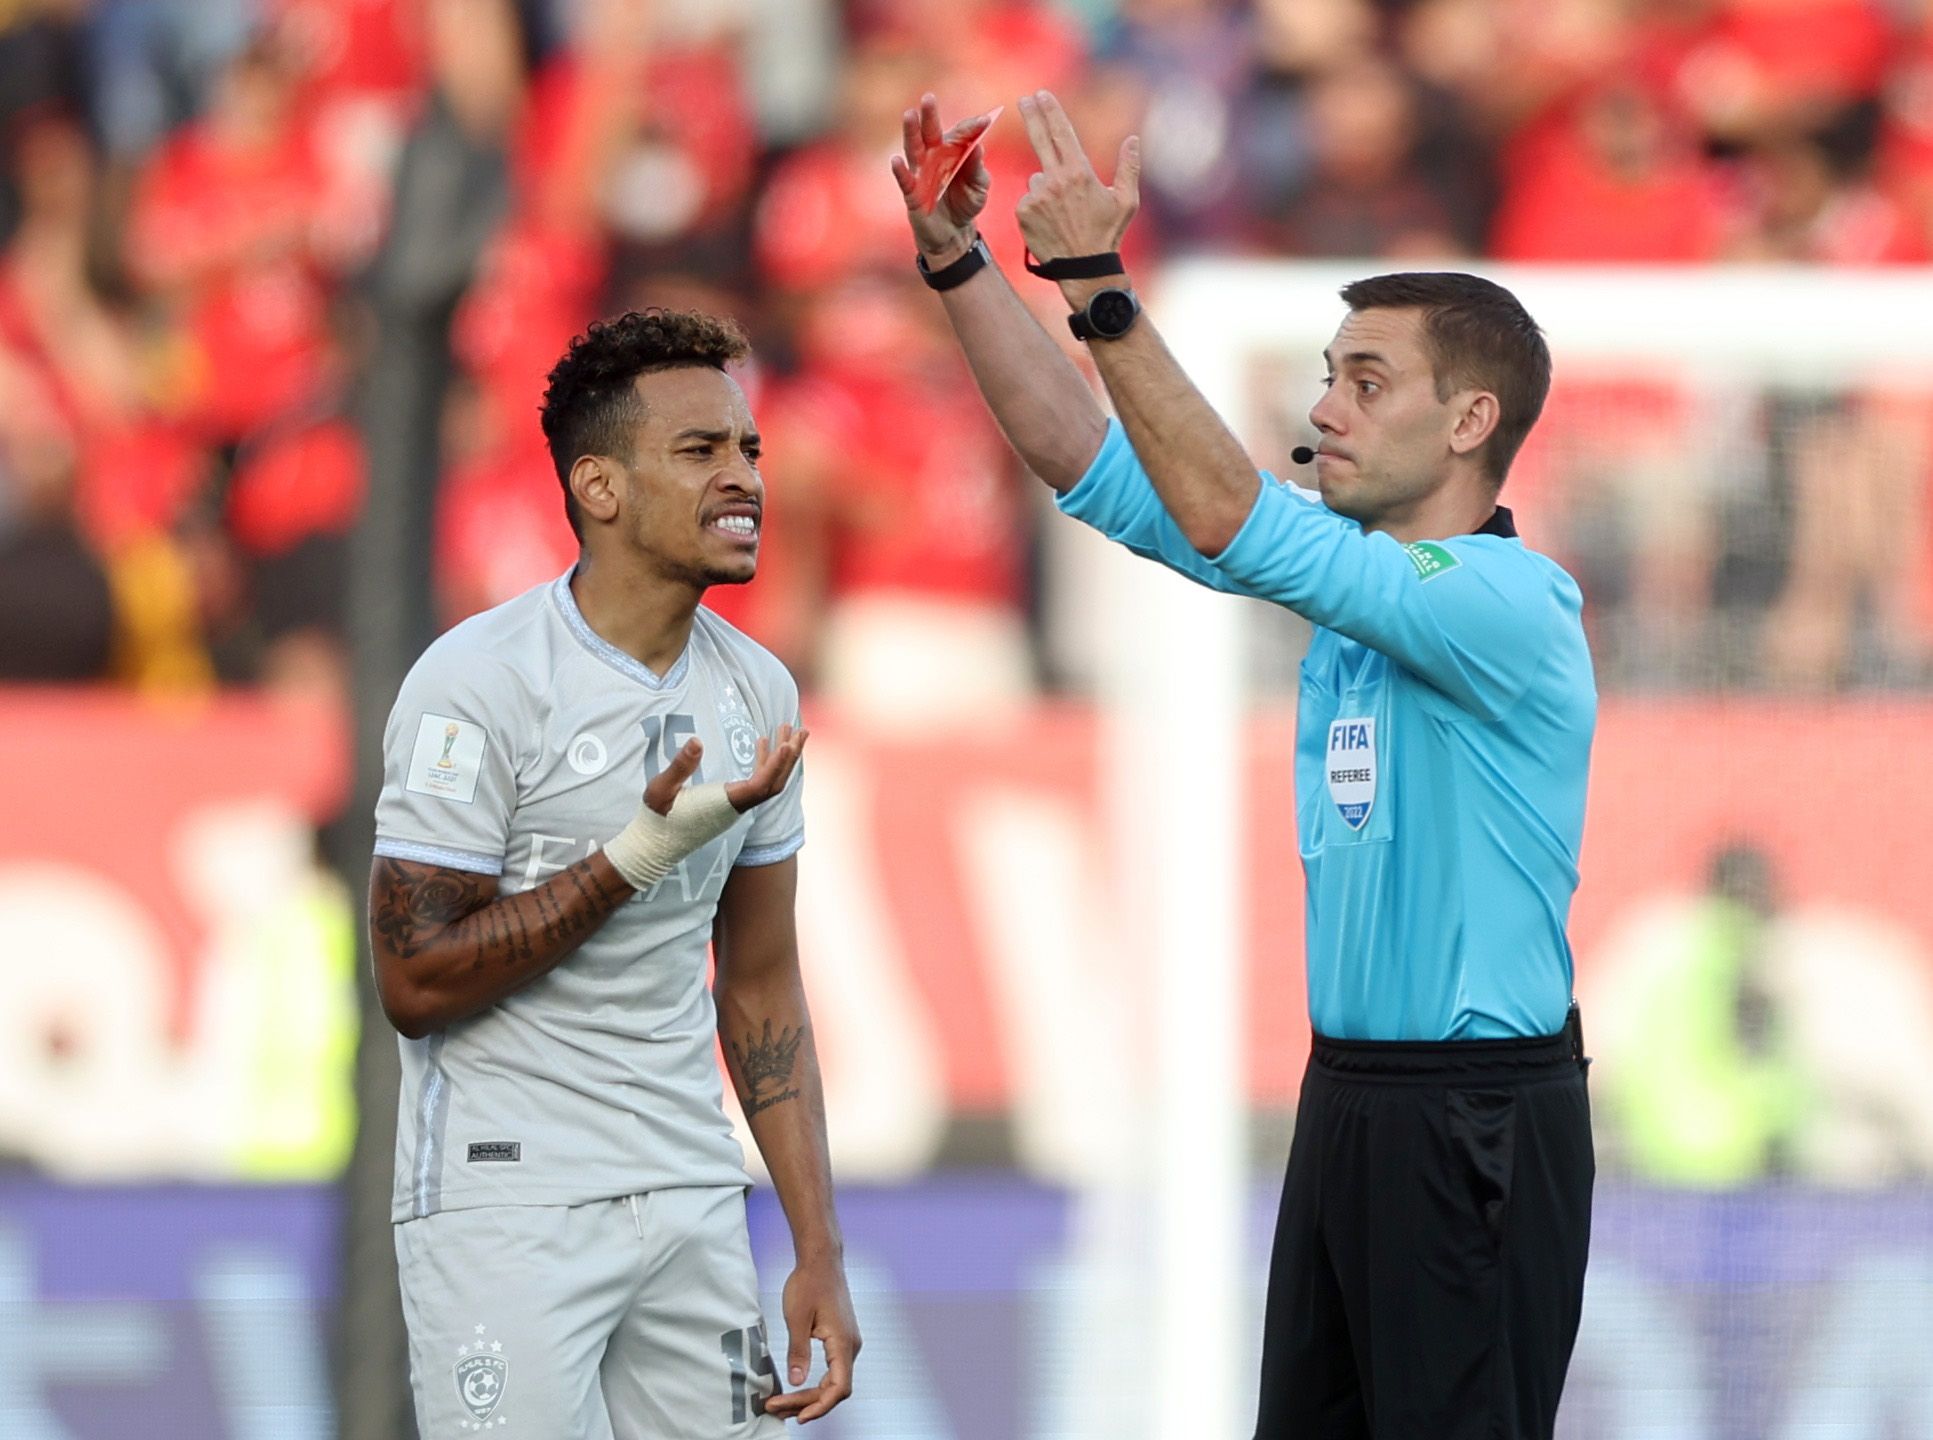 Soccer Football - Club World Cup - Third-Place Playoff - Al Hilal v Al Ahly - Al Nahyan Stadium, Abu Dhabi, United Arab Emirates - February 12, 2022 Al Hilal's Matheus Pereira reacts after he is sent off by referee Clement Turpin REUTERS/Matthew Childs